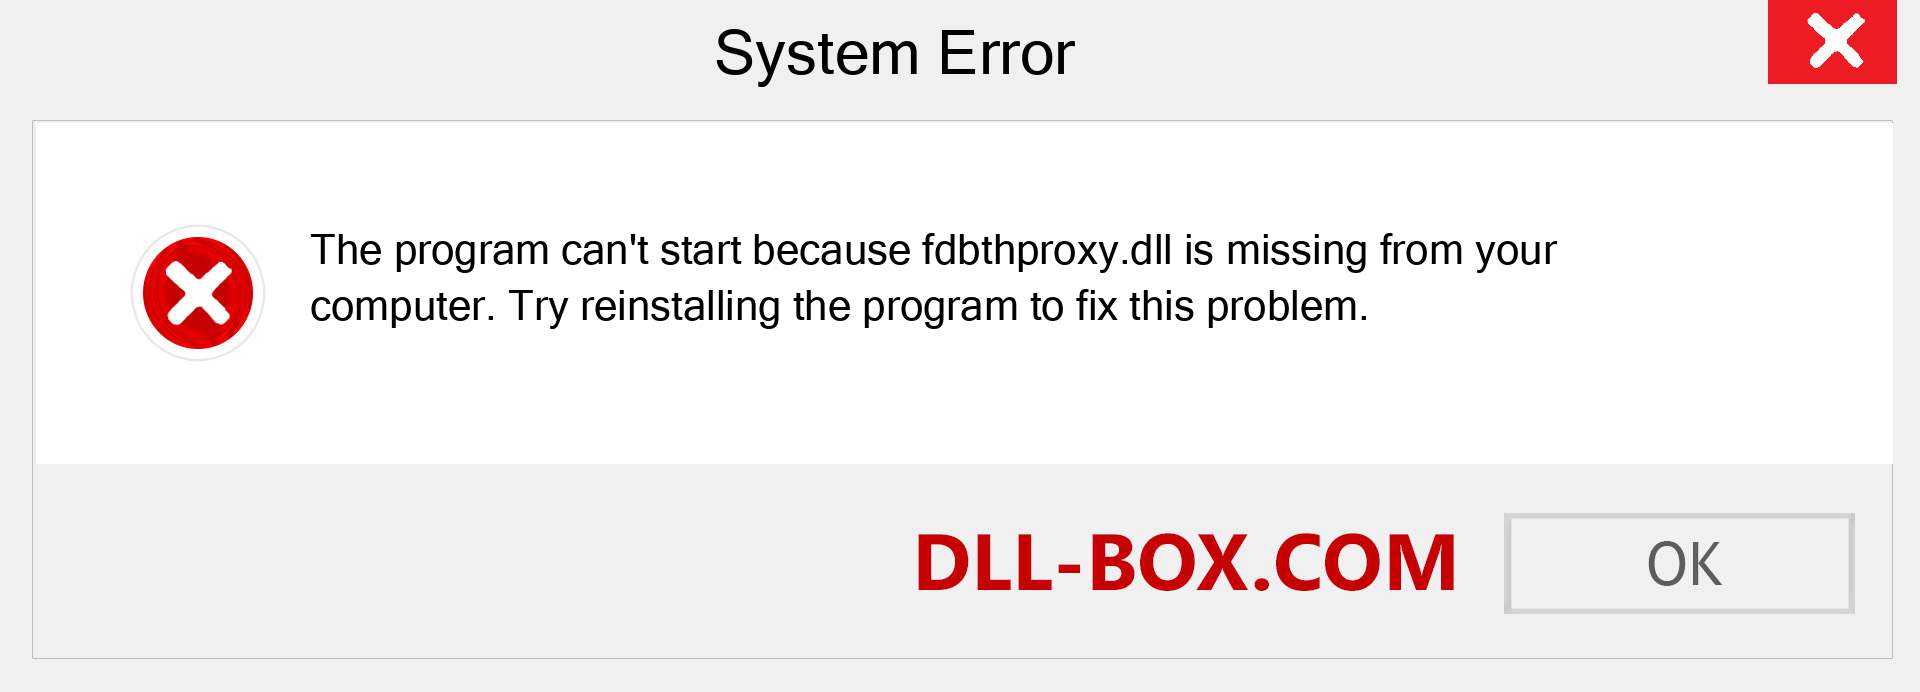  fdbthproxy.dll file is missing?. Download for Windows 7, 8, 10 - Fix  fdbthproxy dll Missing Error on Windows, photos, images